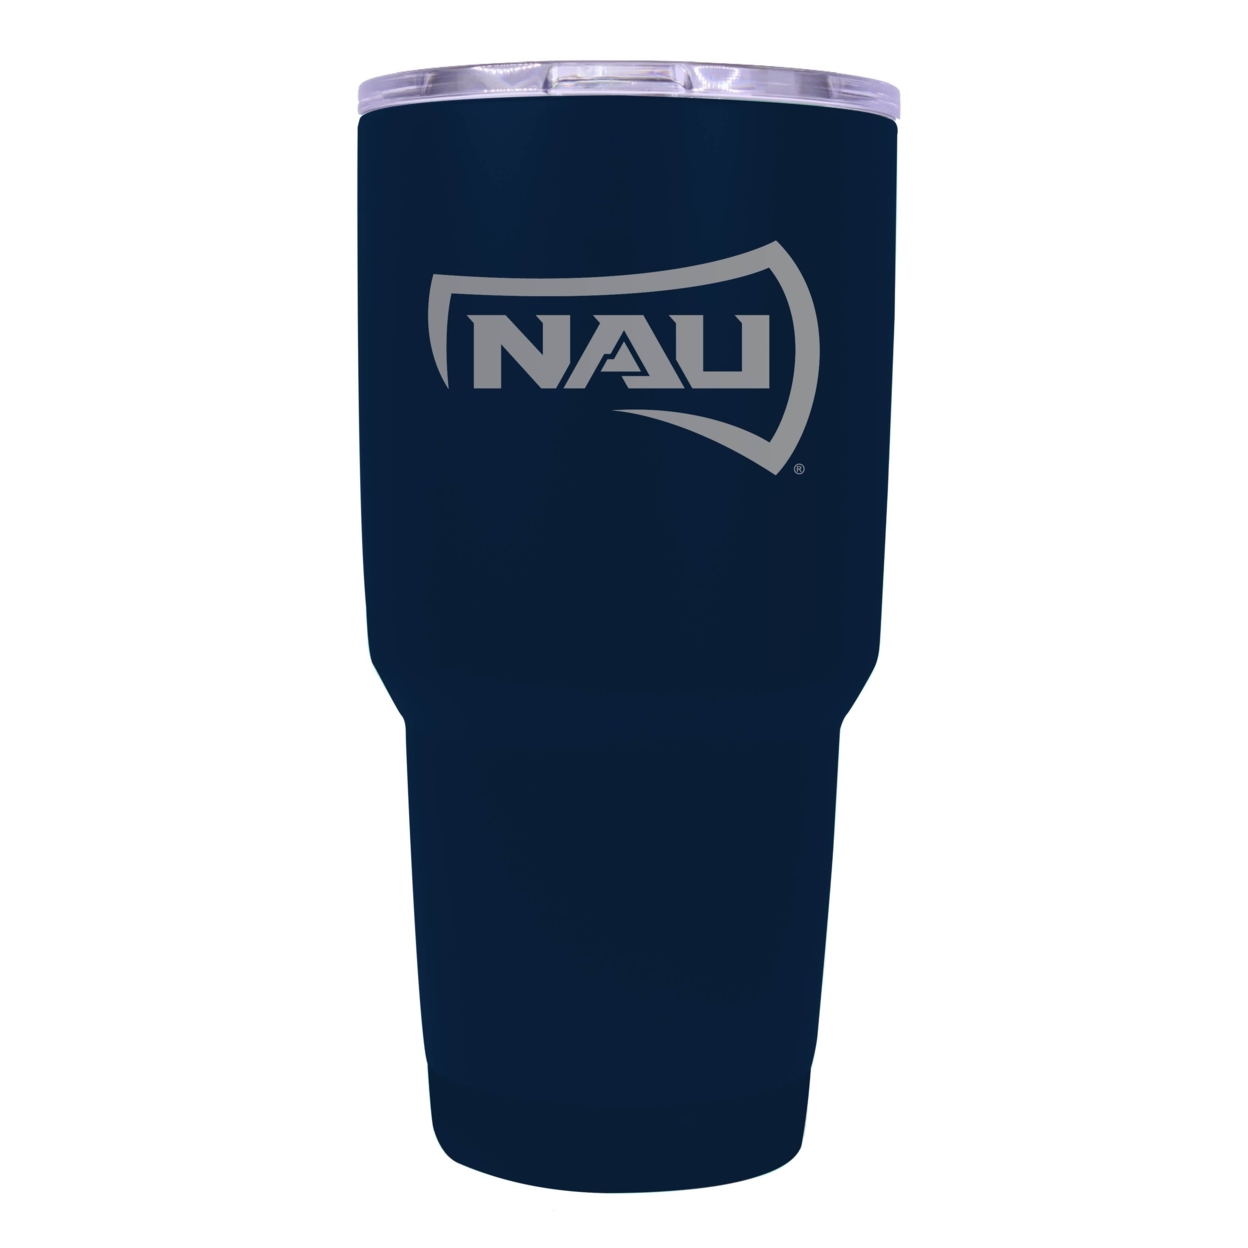 Northern Arizona University 24 Oz Laser Engraved Stainless Steel Insulated Tumbler - Choose Your Color. - Seafoam